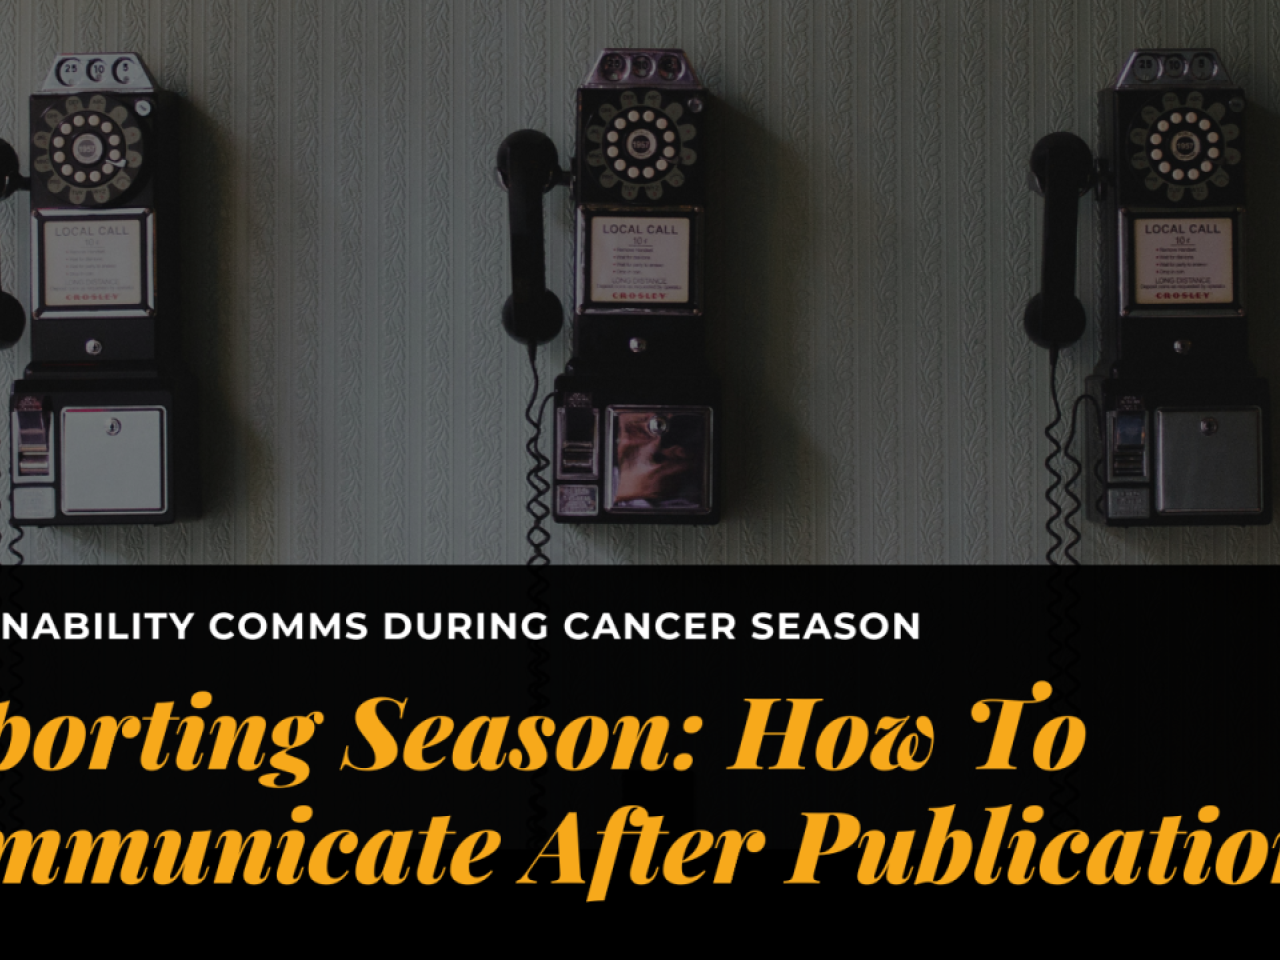 "SUSTAINABILITY COMMS DURING CANCER SEASON Reporting Season: How To Communicate After Publication"